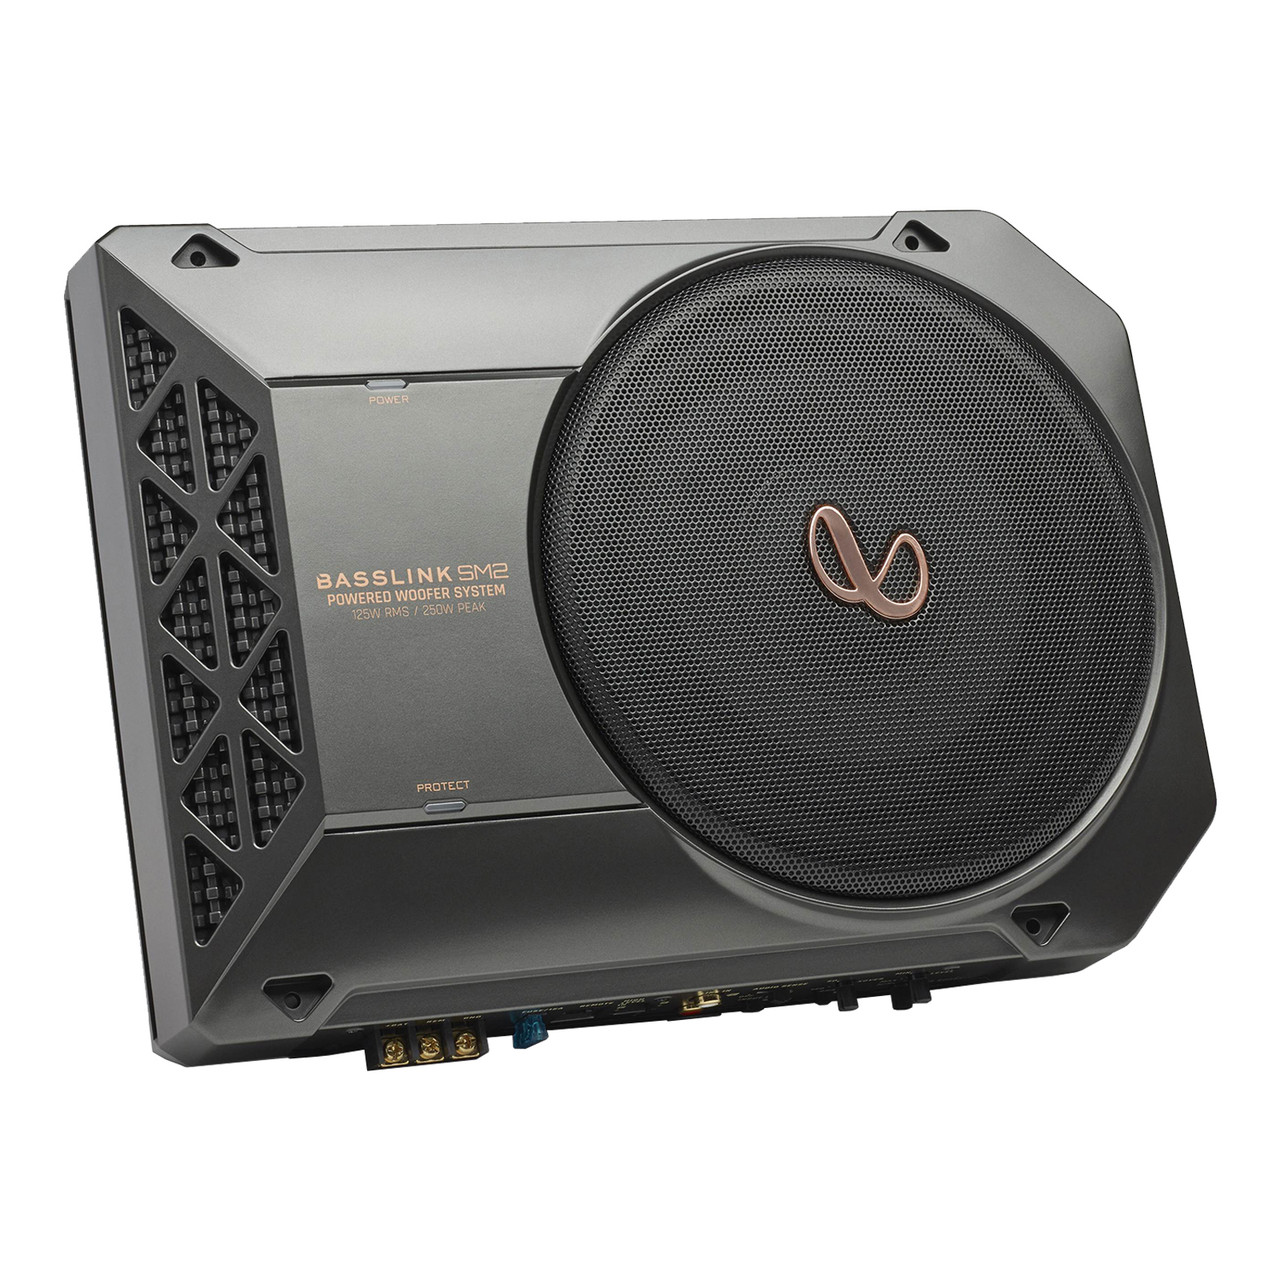 Infinity BASSLINK SM 8” Class D Powered Underseat Design Shallow-Profile Audio Subwoofer with Remote Bass Control - Road Entertainment